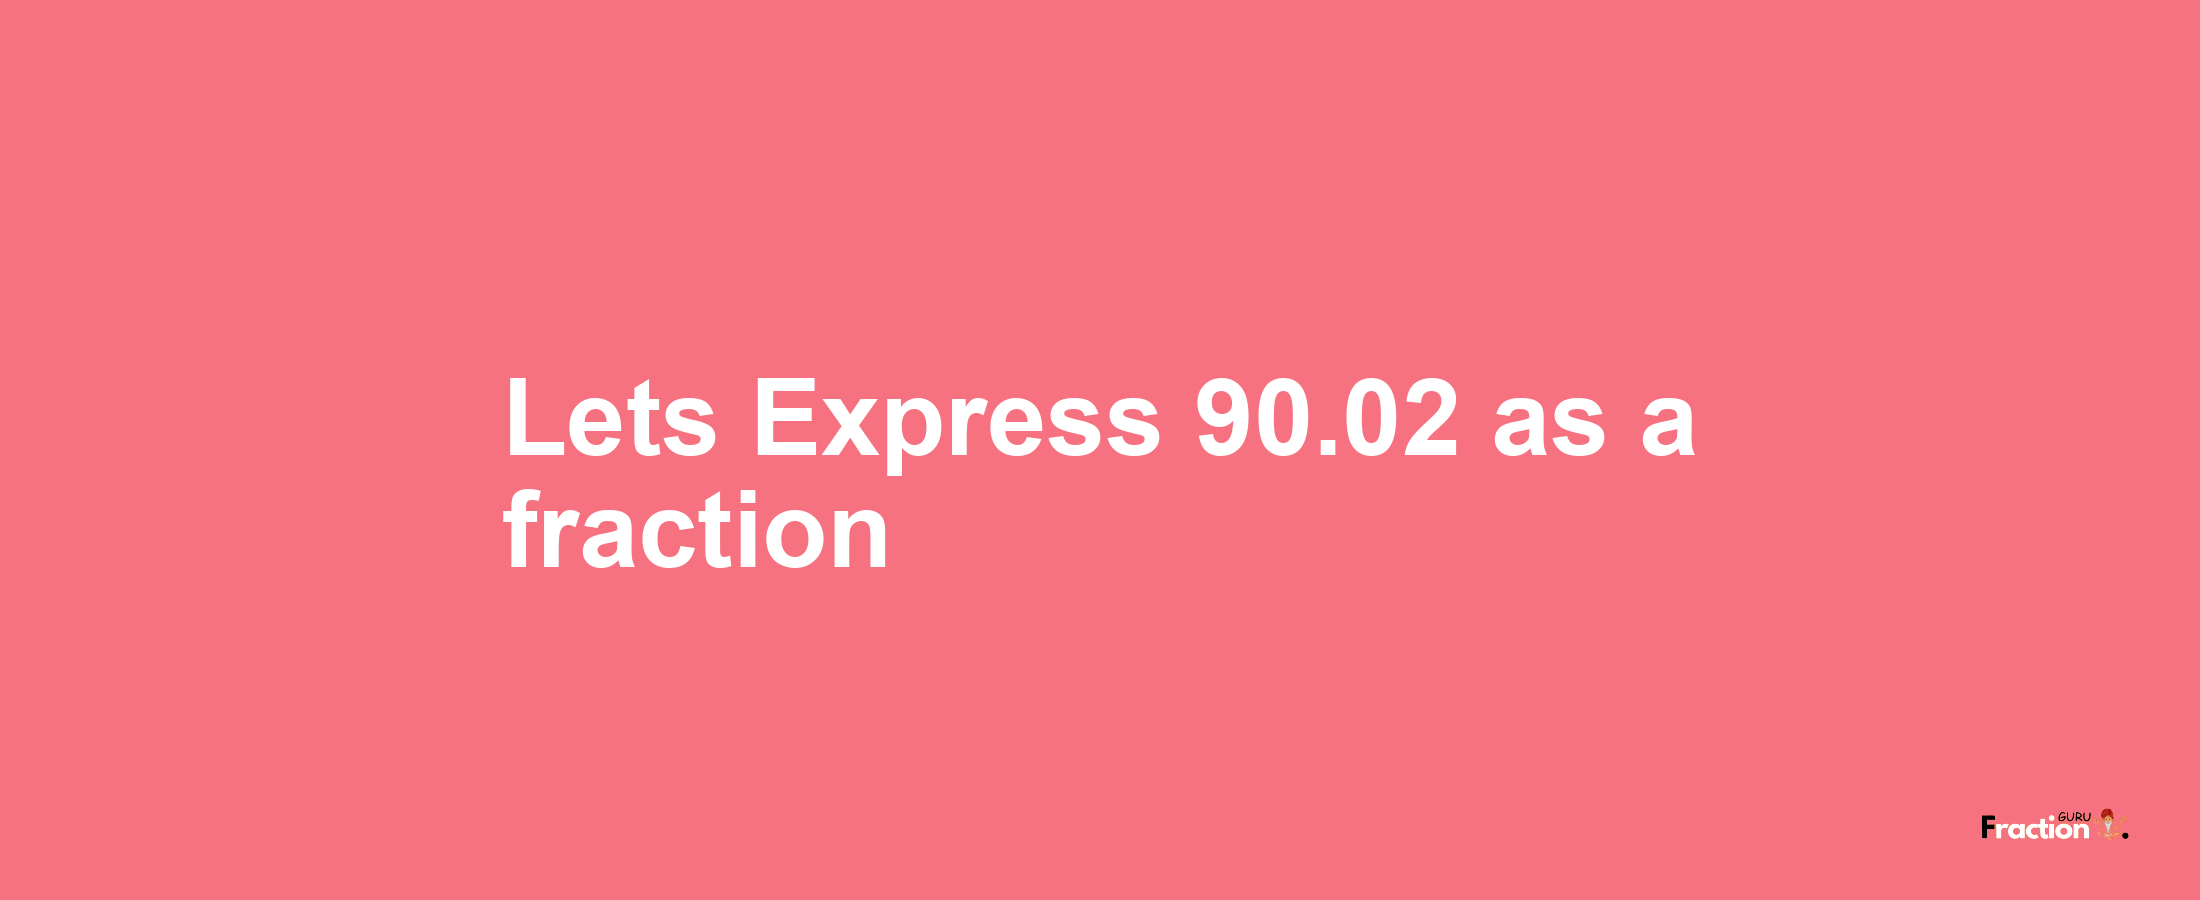 Lets Express 90.02 as afraction